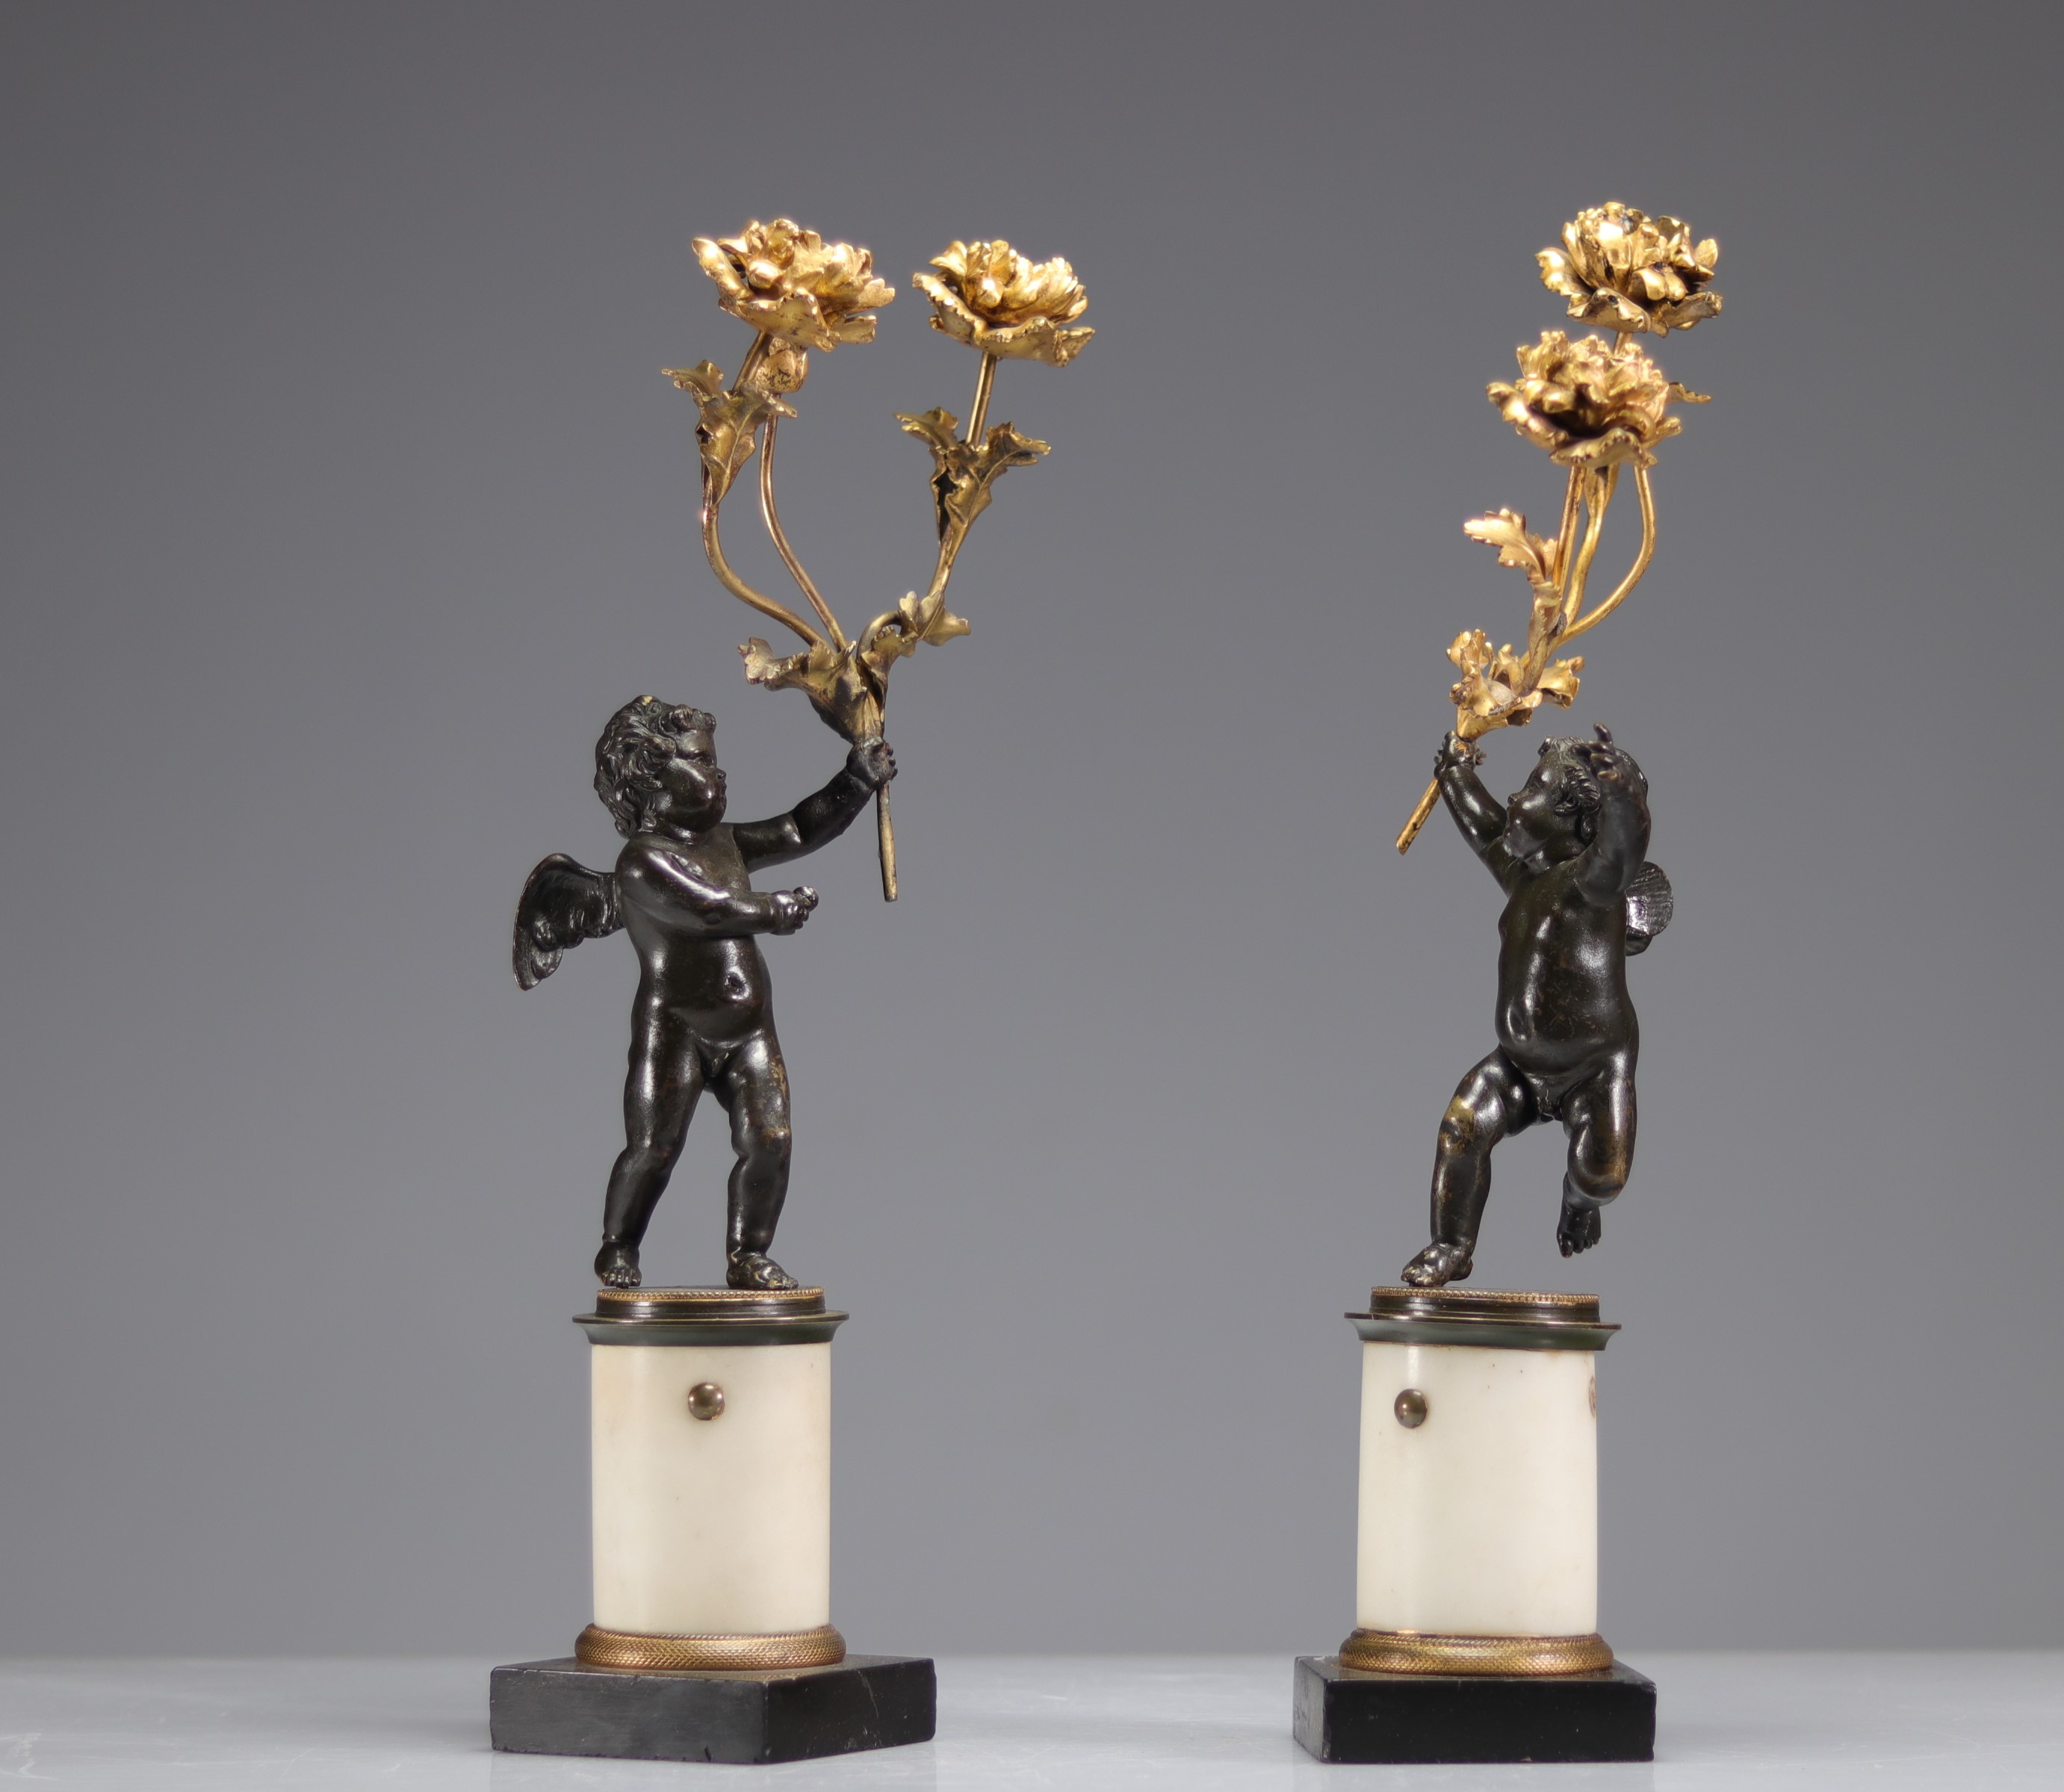 Pair of bronze candlesticks with two Louis XV style patinas - Image 2 of 3